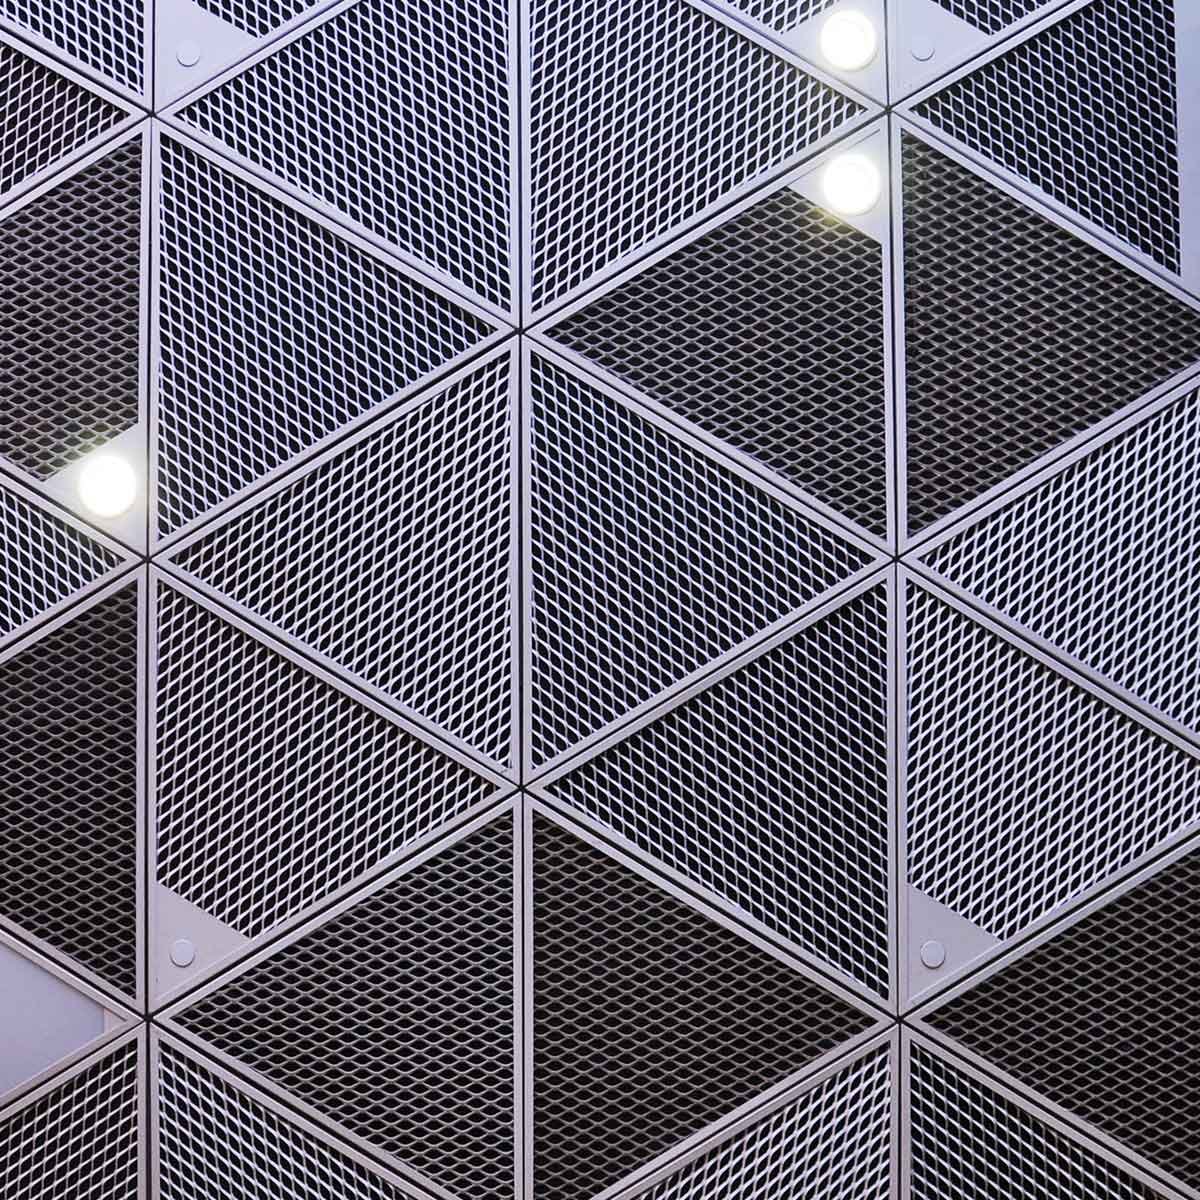 Expanded Metal Mesh Ceiling, Lightweight and Highly Shaped